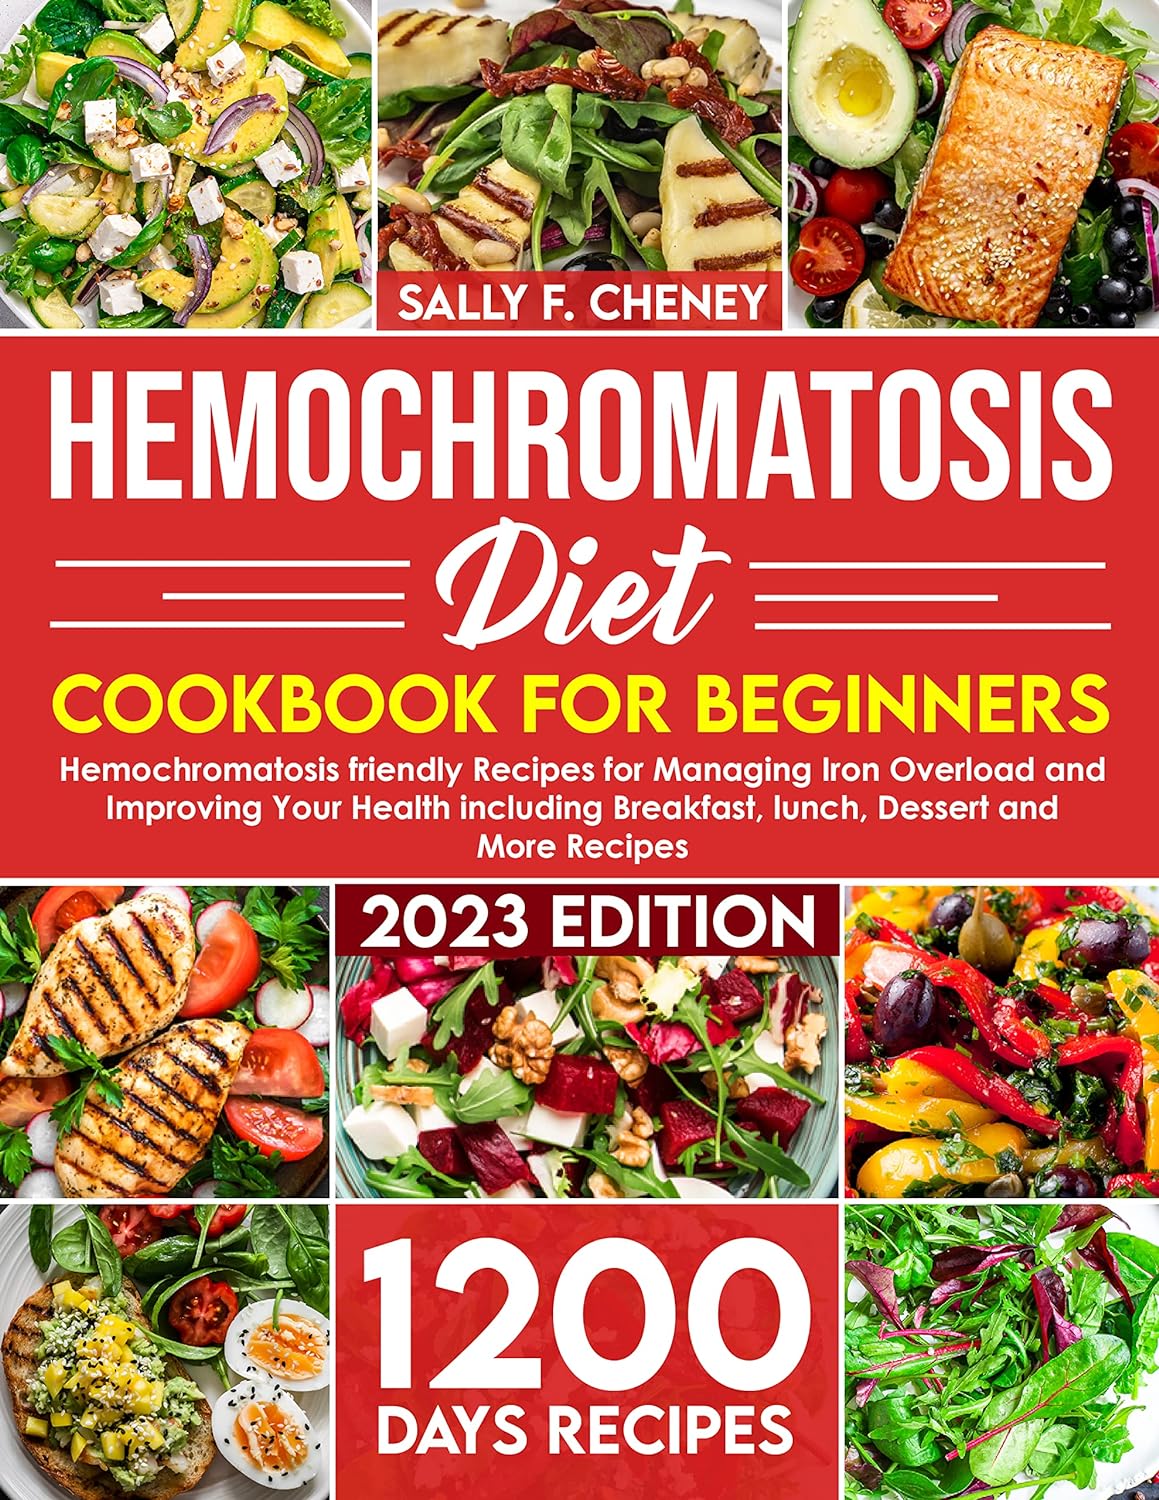 Hemochromatosis Diet Cookbook for Beginners: 1200 Days Hemochromatosis friendly Recipes for Managing Iron Overload and Improving Your Health including Breakfast, lunch, Dessert and More Recipes     Kindle Edition